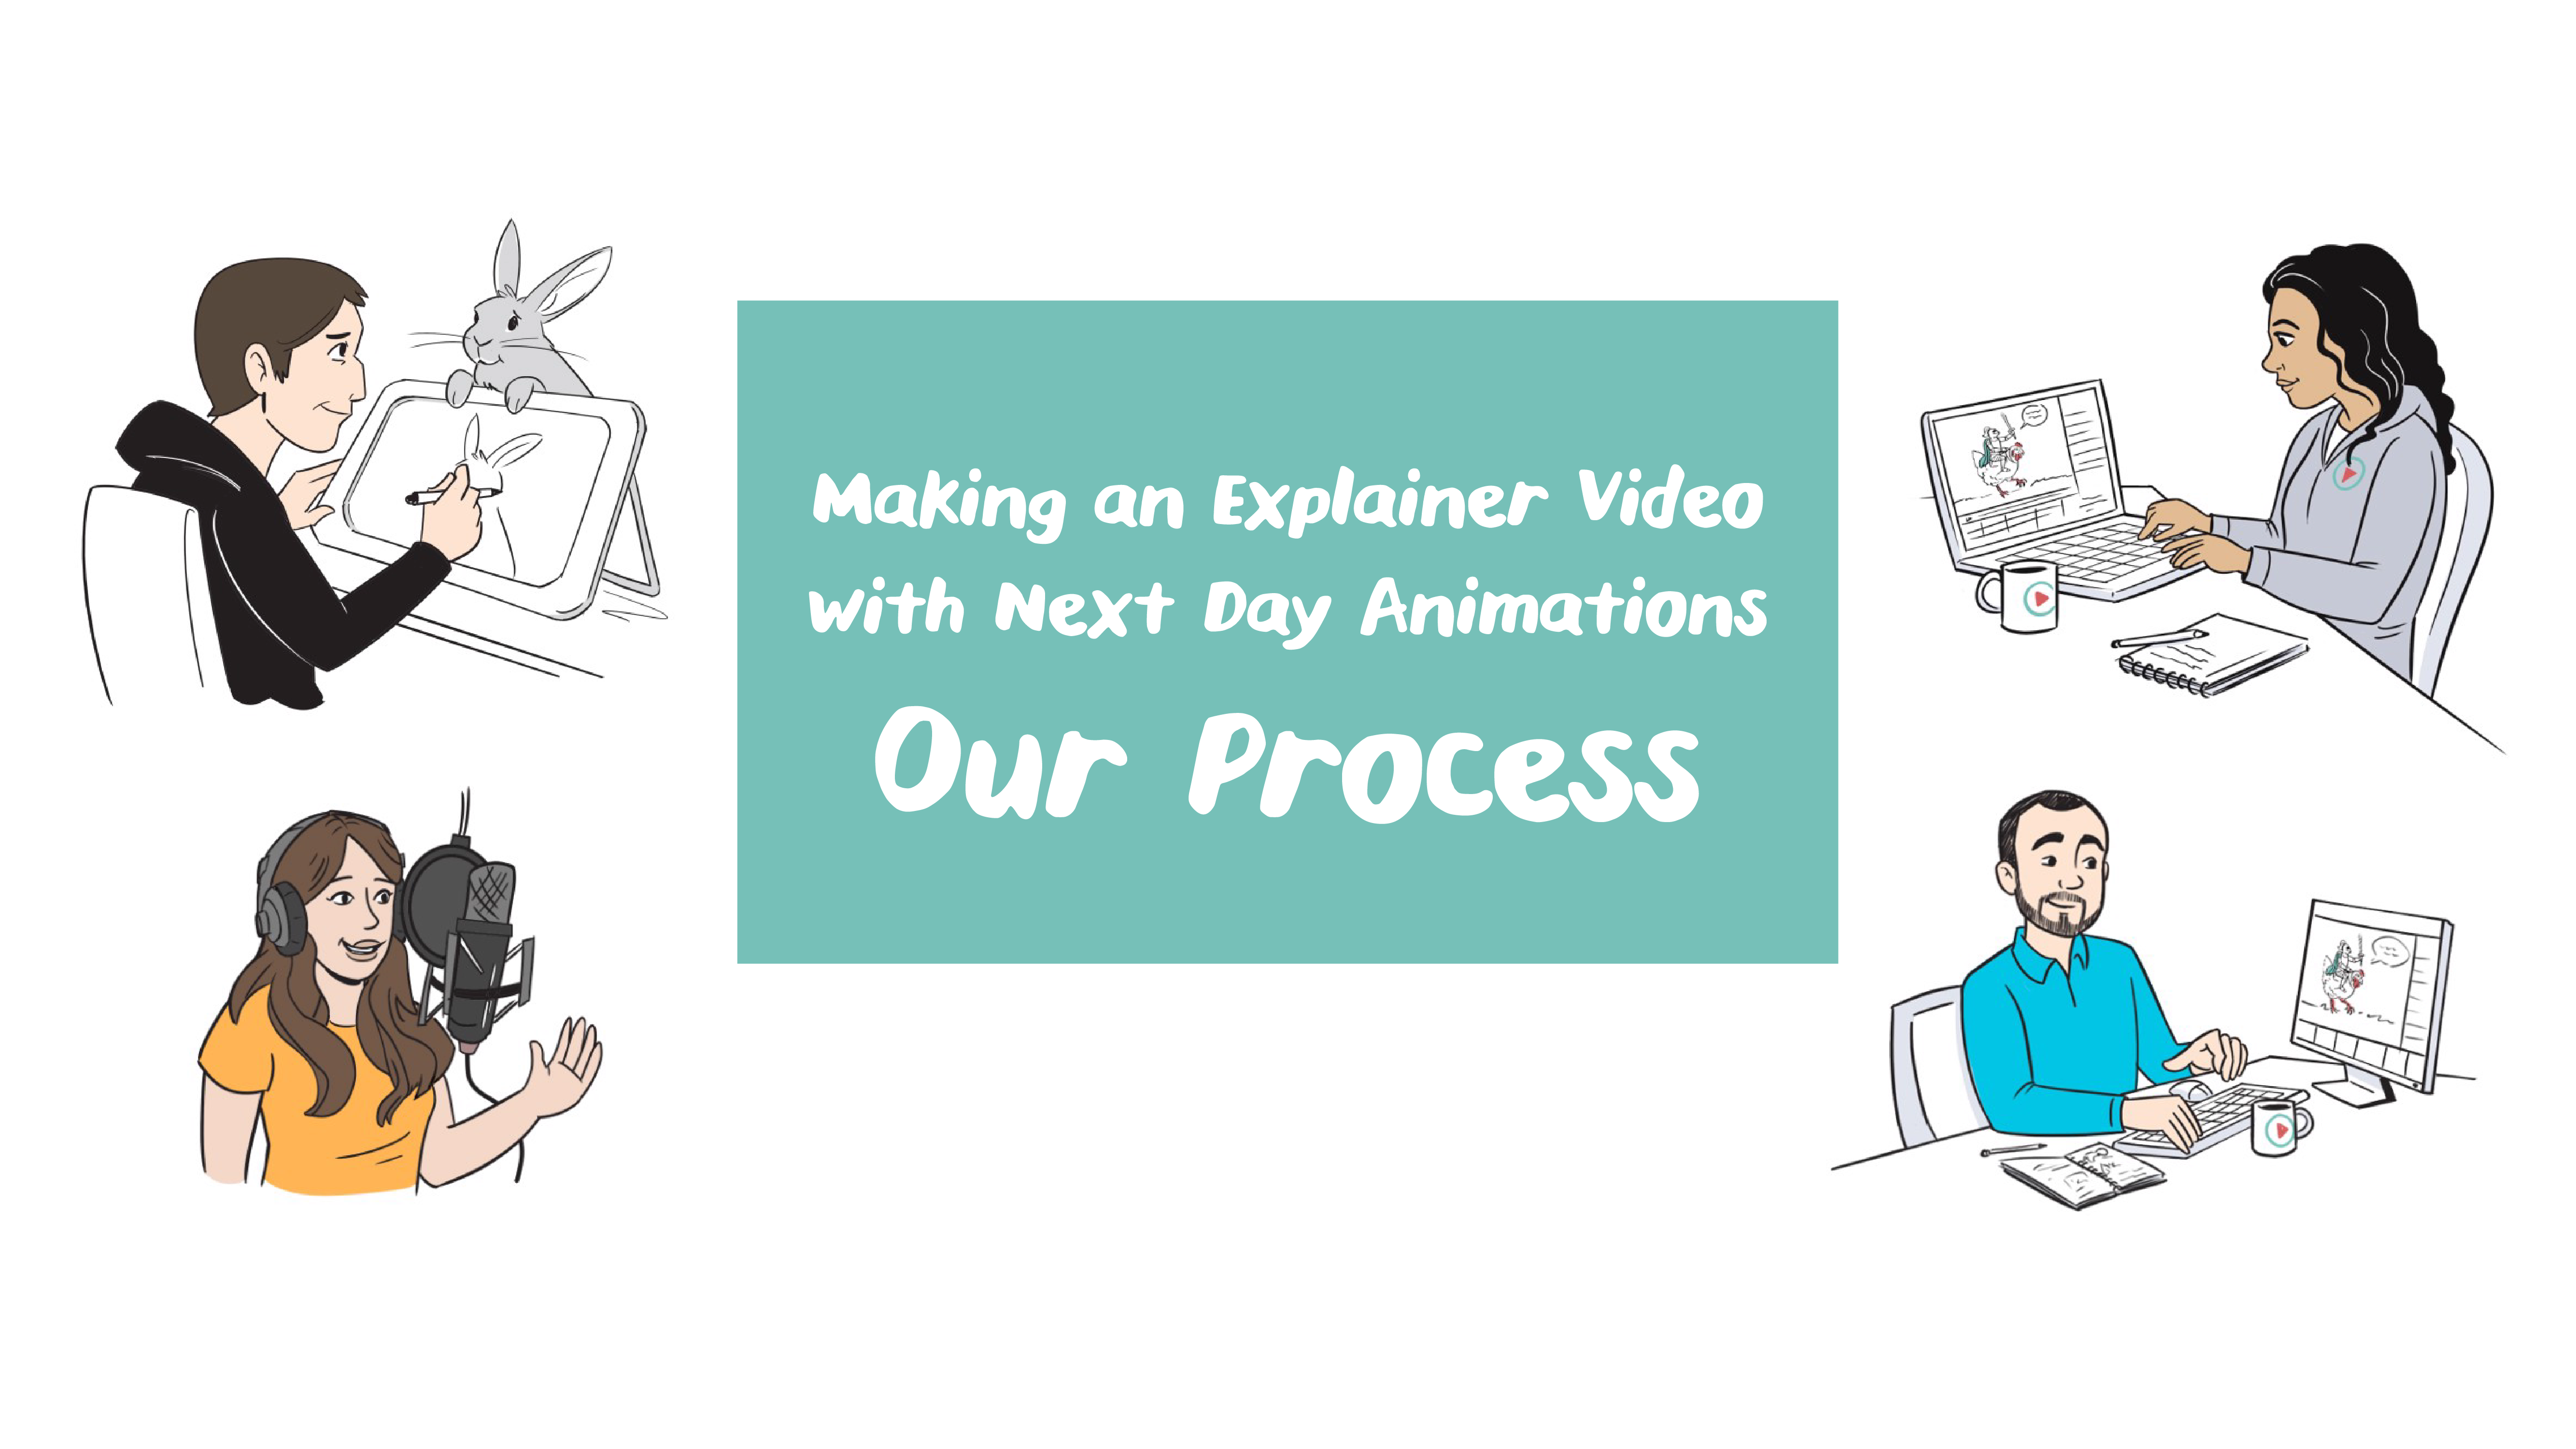 The title of the blog i (Making an Explainer Video with Next Day Animations: Our Process)s centered in white font on a turquoise background; the title is surrounded by sweet, animated depictions of our Next Day team completing the different steps of our process; an illustrator draws, a voiceover artist records, and producers manage projects